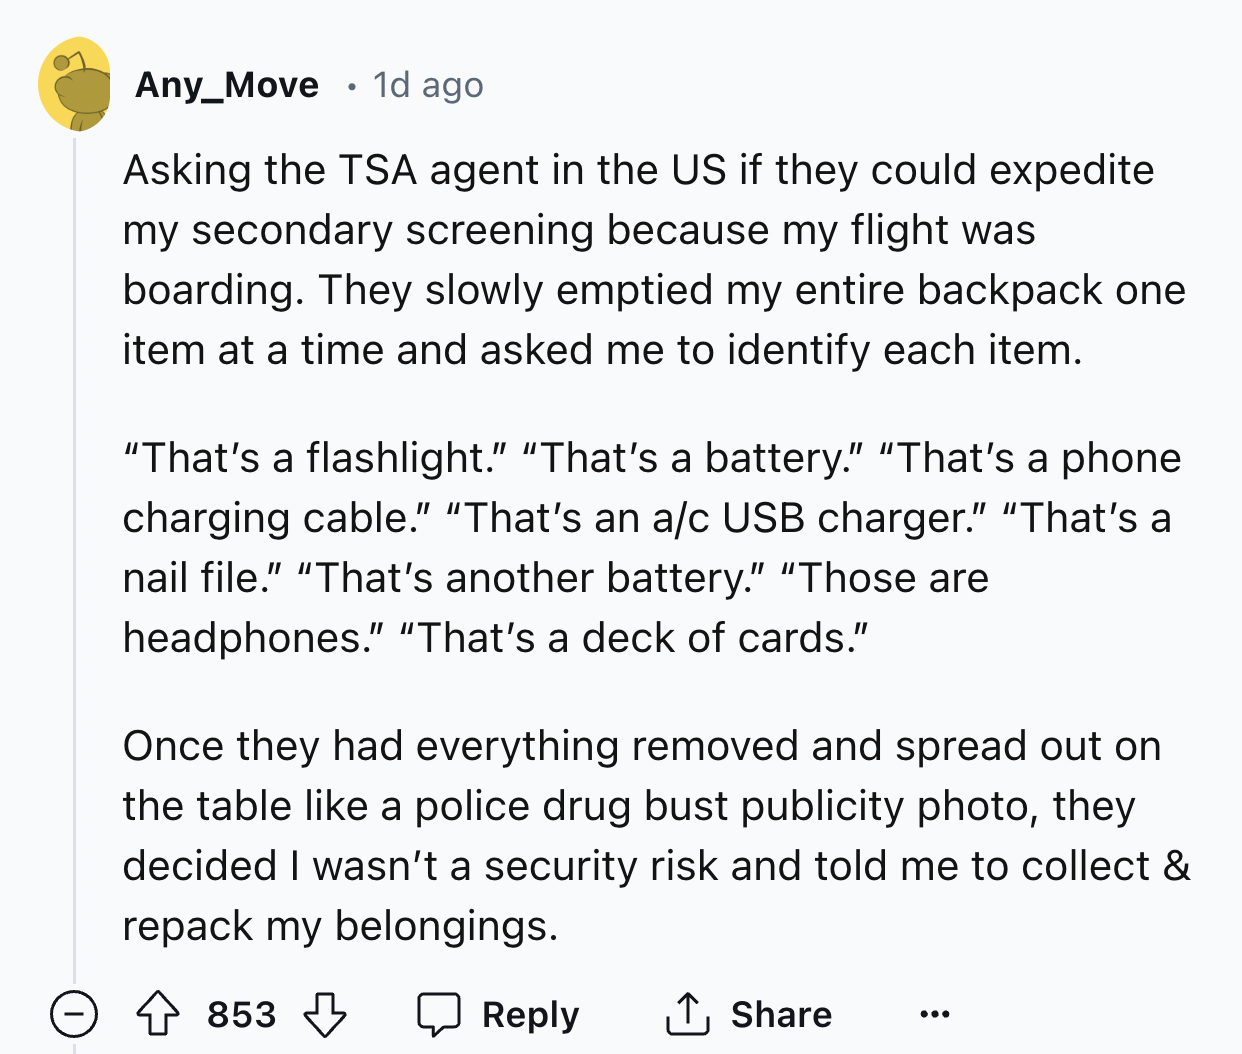 screenshot - Any_Move 1d ago Asking the Tsa agent in the Us if they could expedite my secondary screening because my flight was boarding. They slowly emptied my entire backpack one item at a time and asked me to identify each item. "That's a flashlight." 